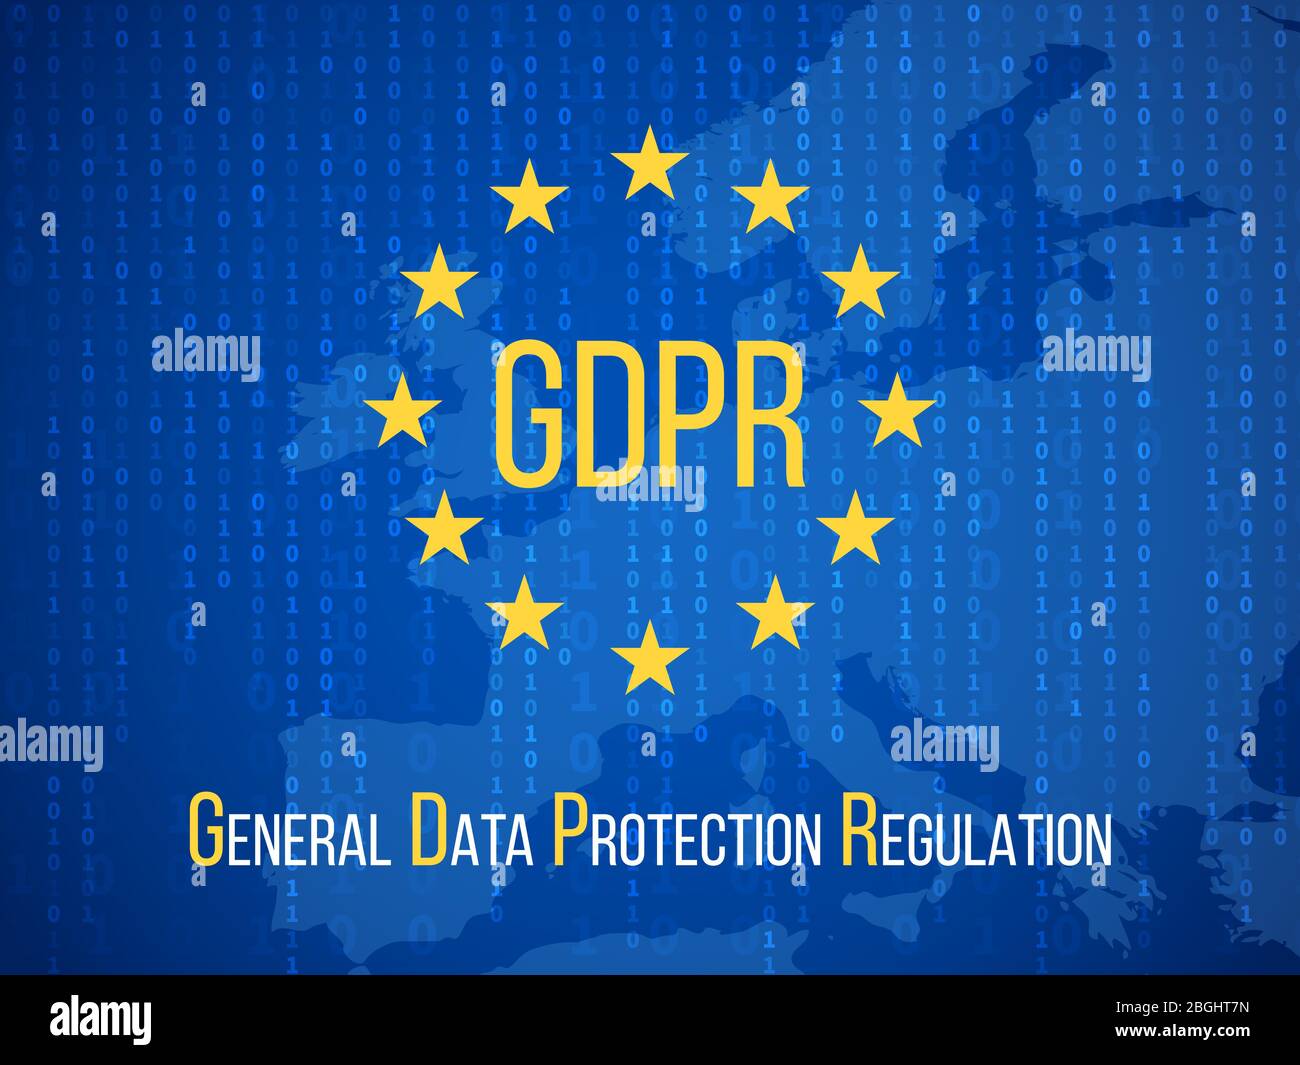 Gdpr general data protection regulation. Internet business safety vector background. Illustration of gdpr banner, protection and security Stock Vector